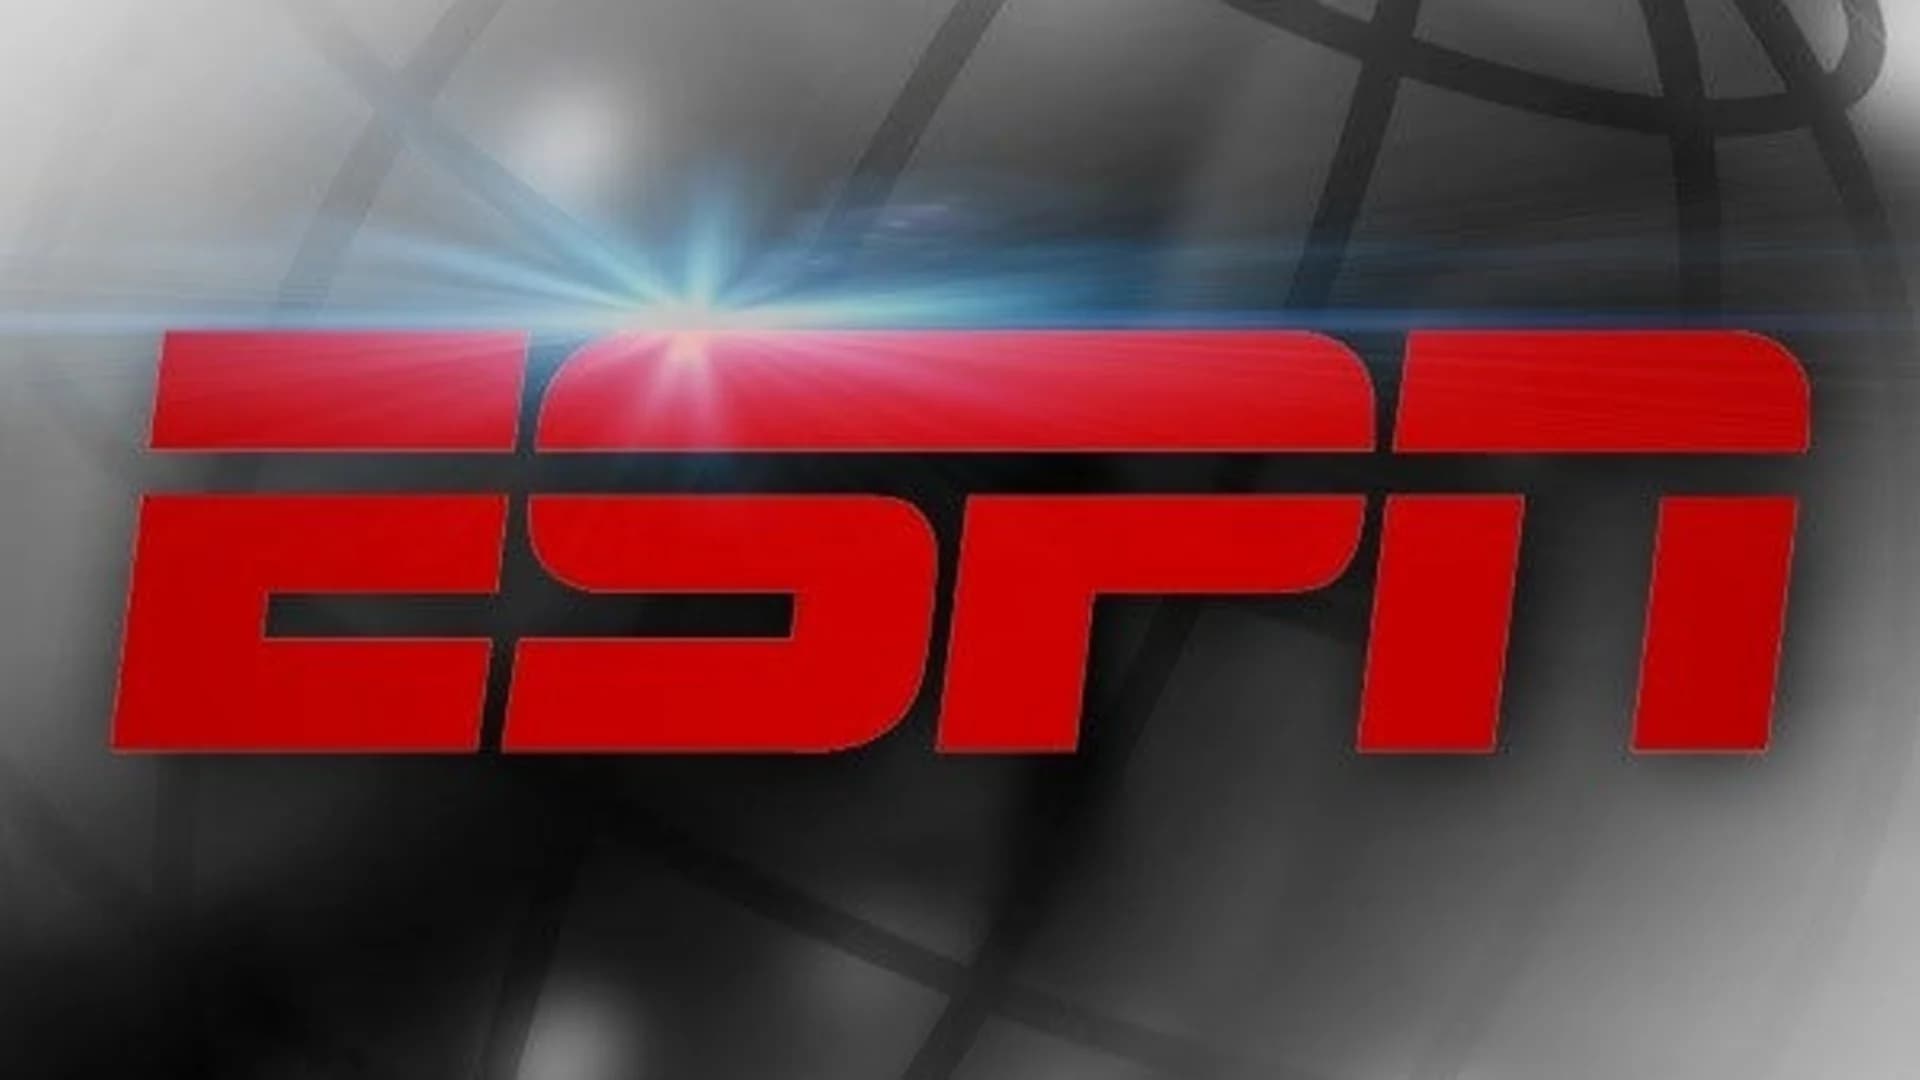 Former on-air personality says ESPN was hostile workplace